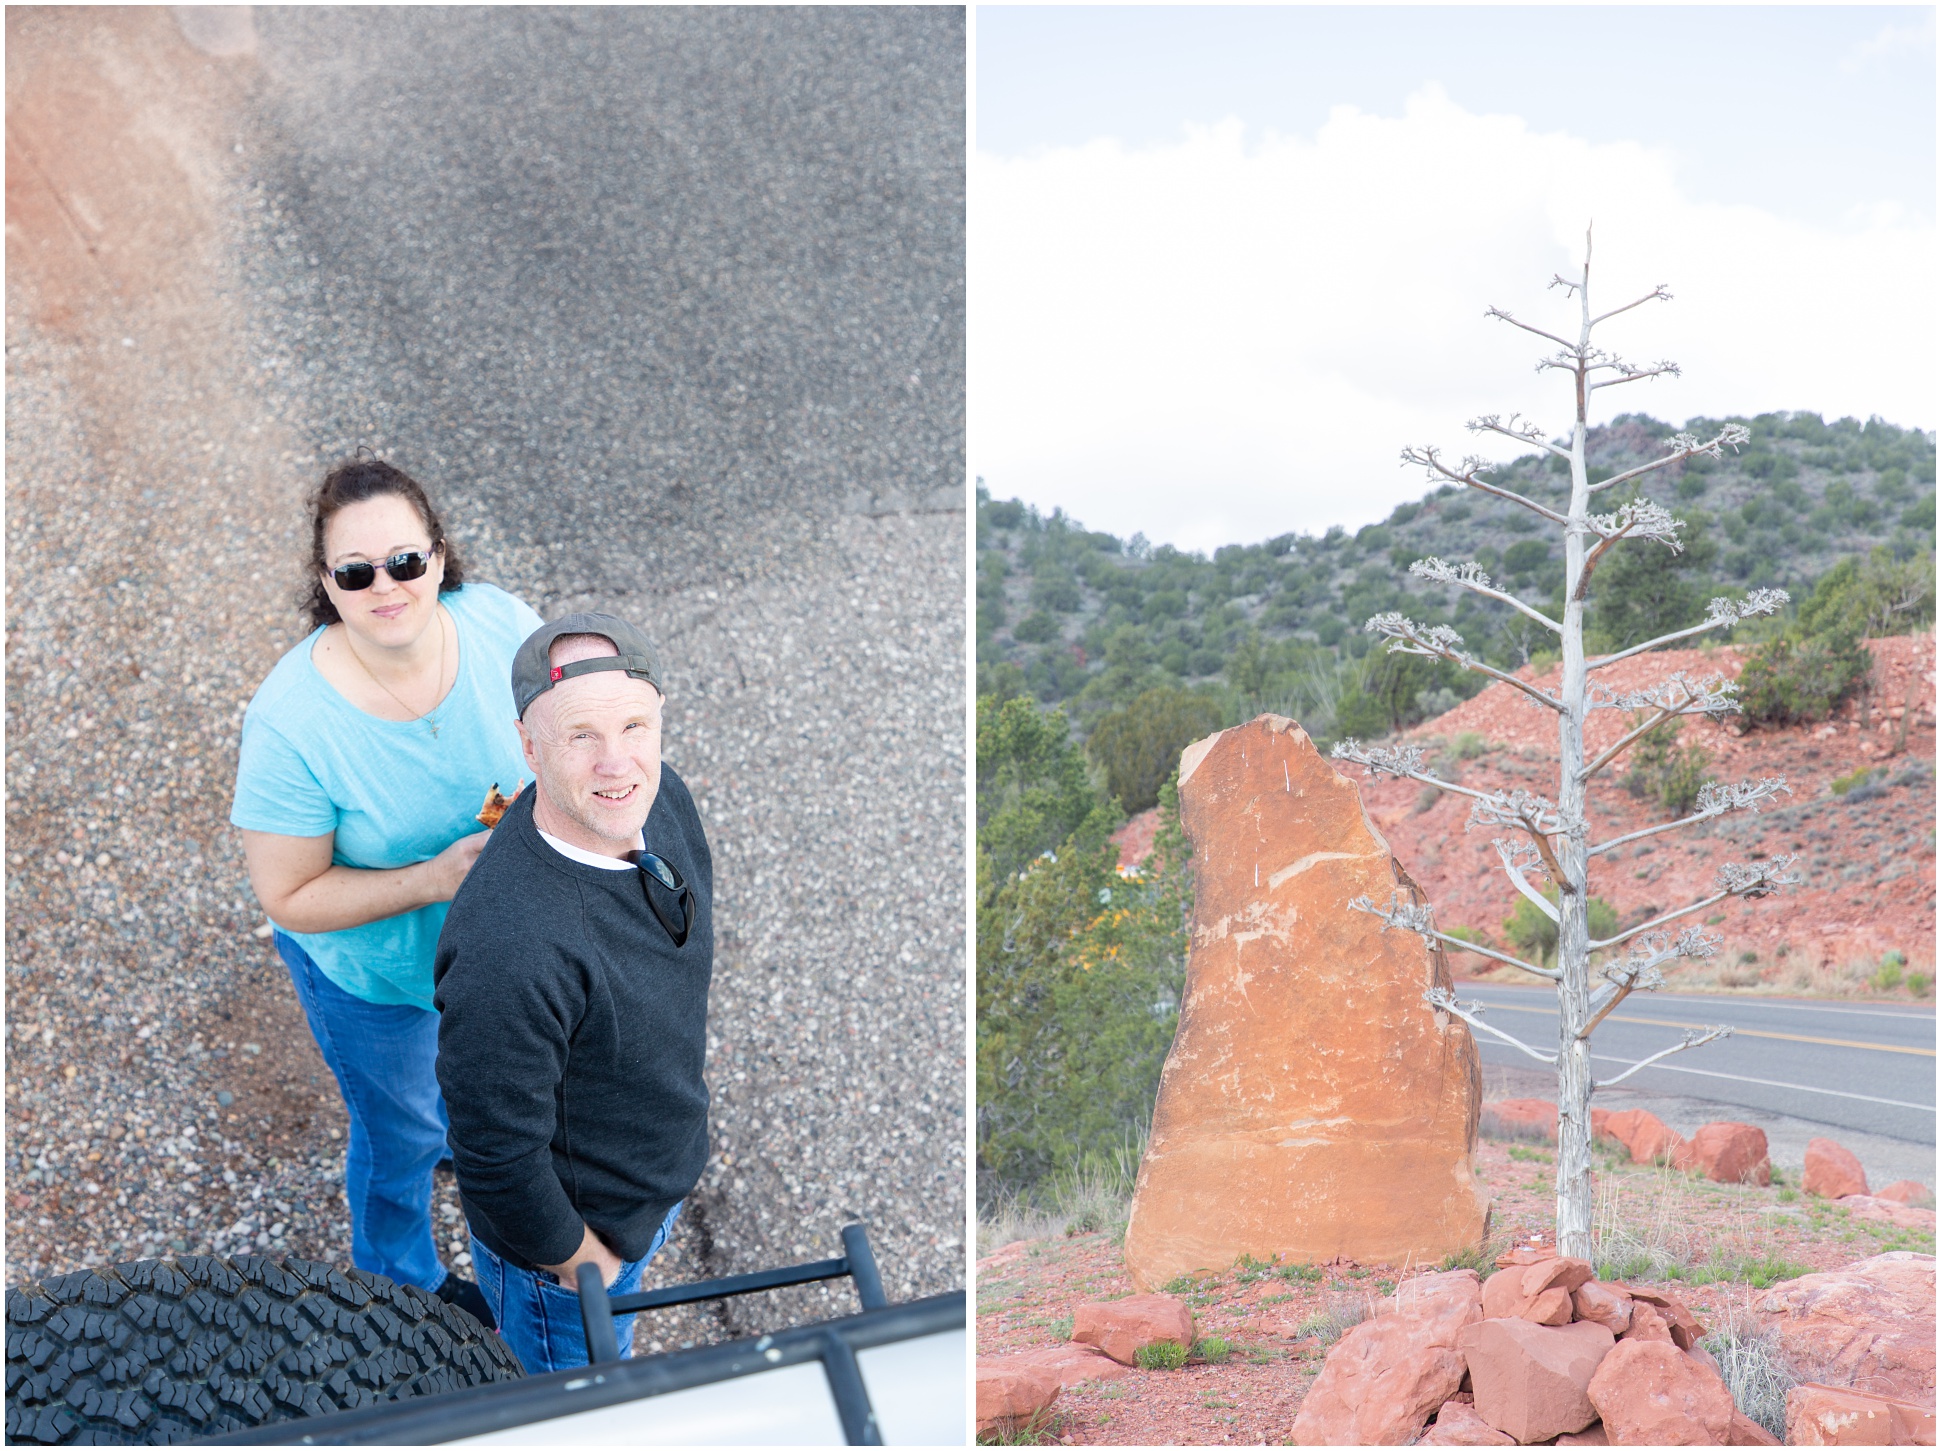 Left Image: Two adults, male and female, looking up at the roof of a LandRover, Right Image, a dead tree in Sedona